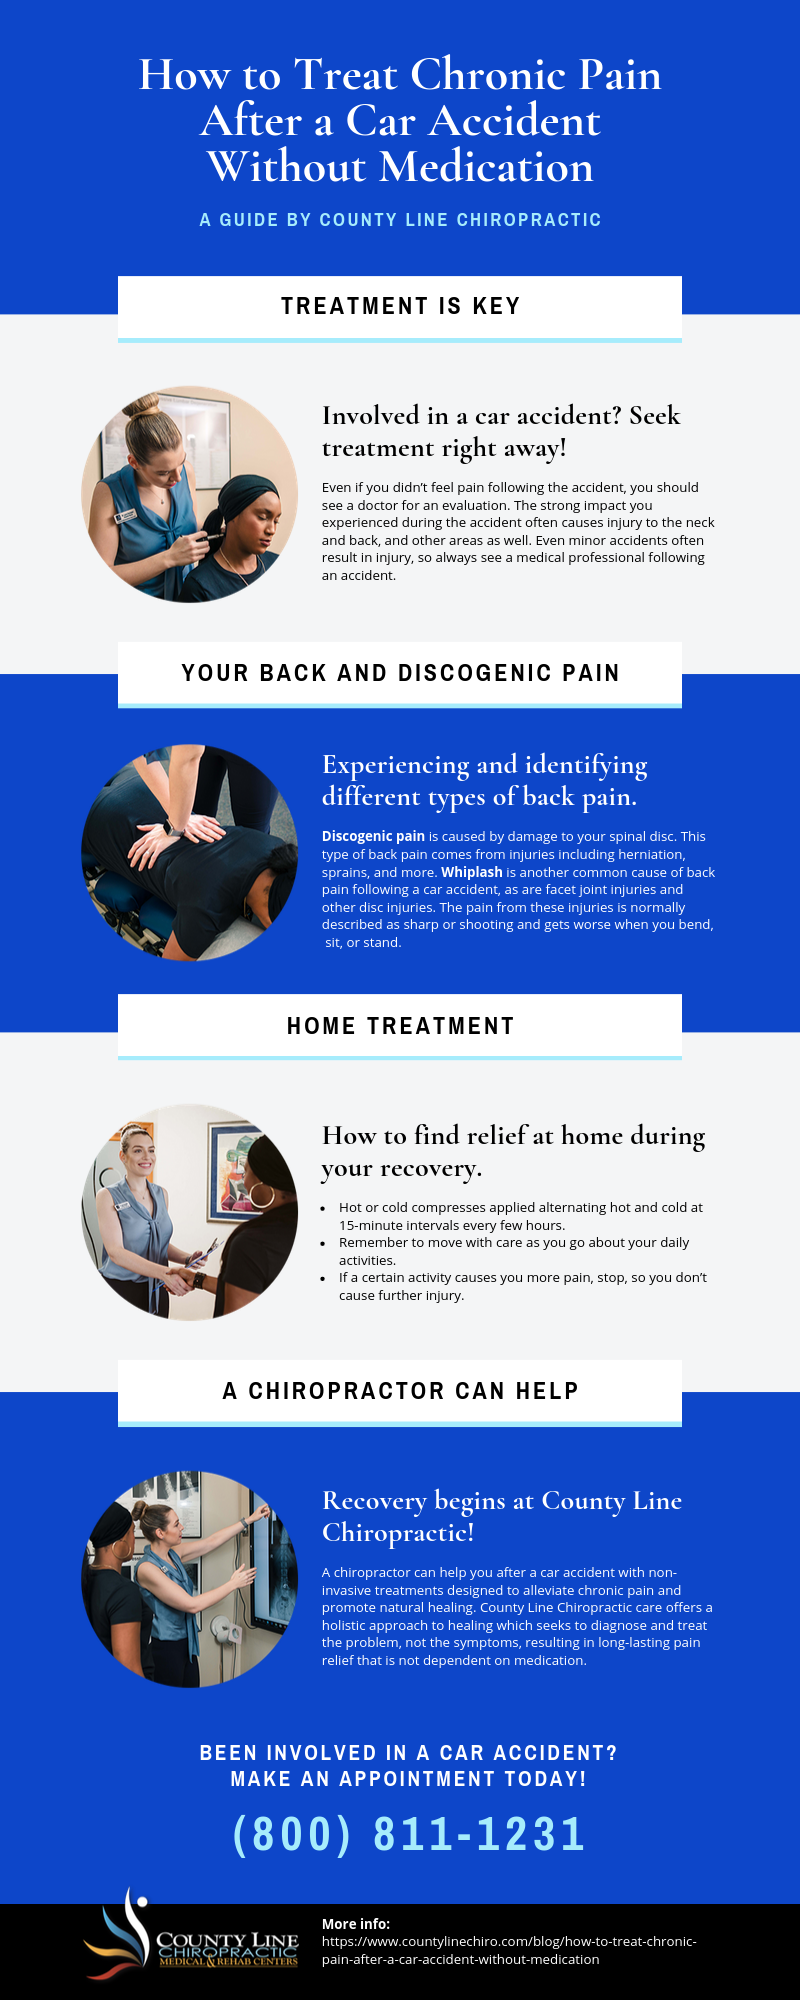 How to Treat Chronic Pain After a Car Accident Without Medication